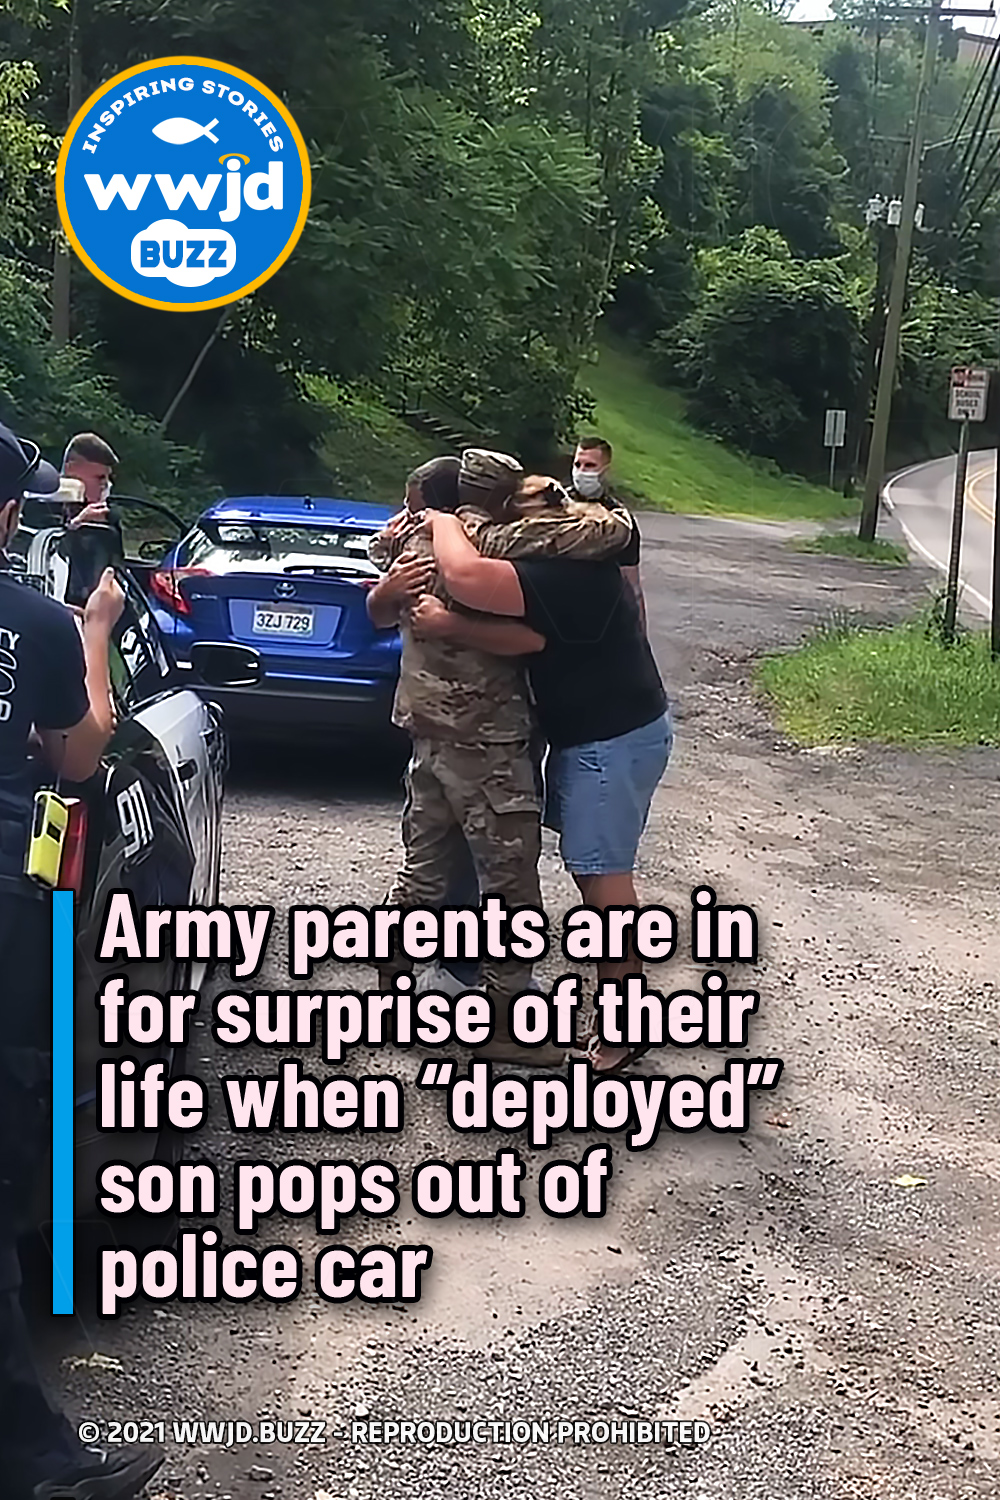 Army parents are in for surprise of their life when “deployed” son pops out of police car